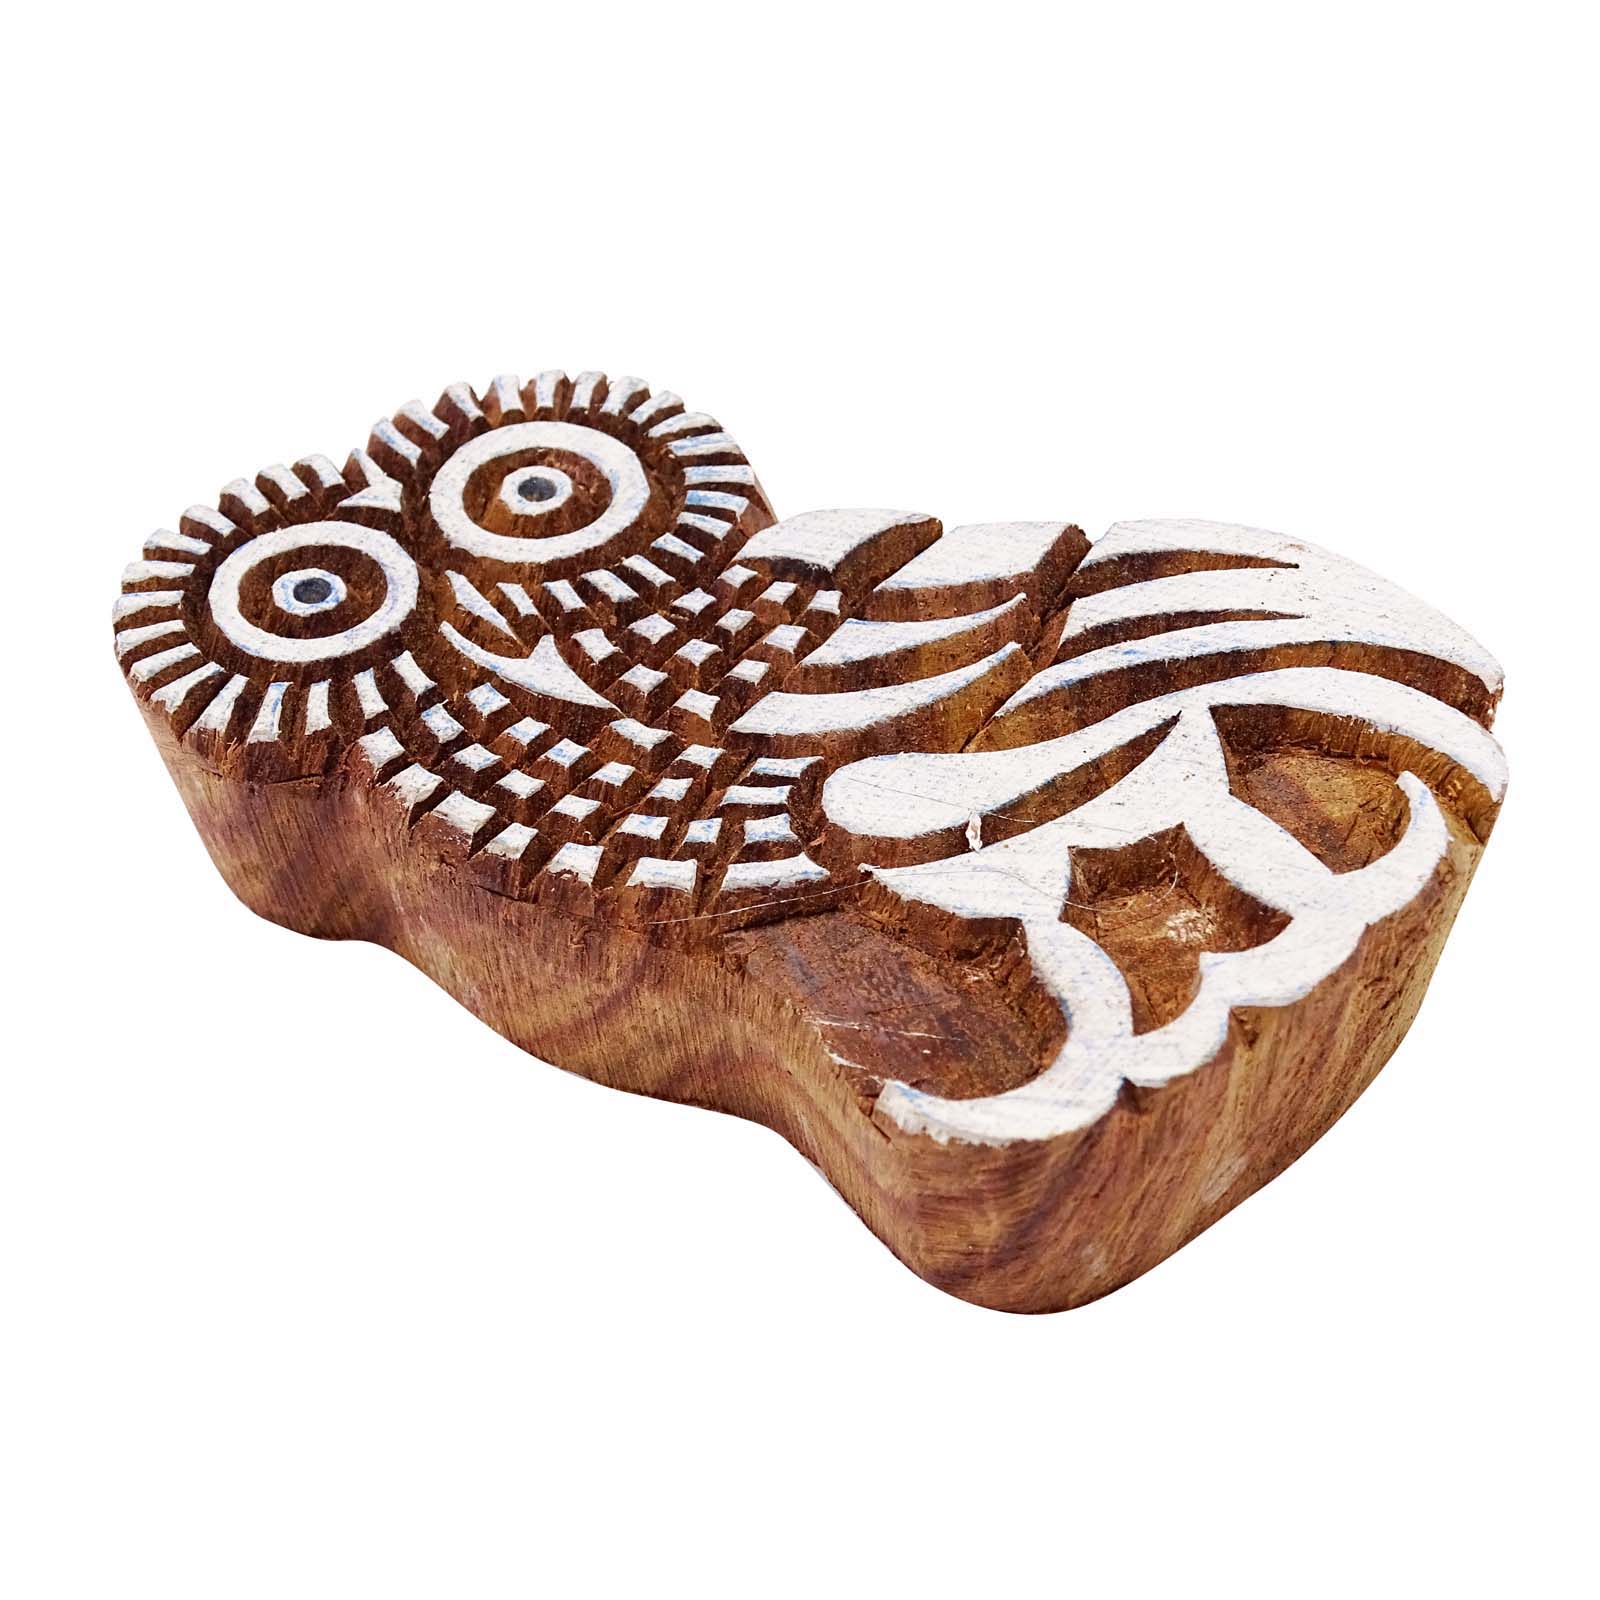 Woodblock Stamp Owl Decorative Blocks Brown Indian Wood Art Stamps For Clay